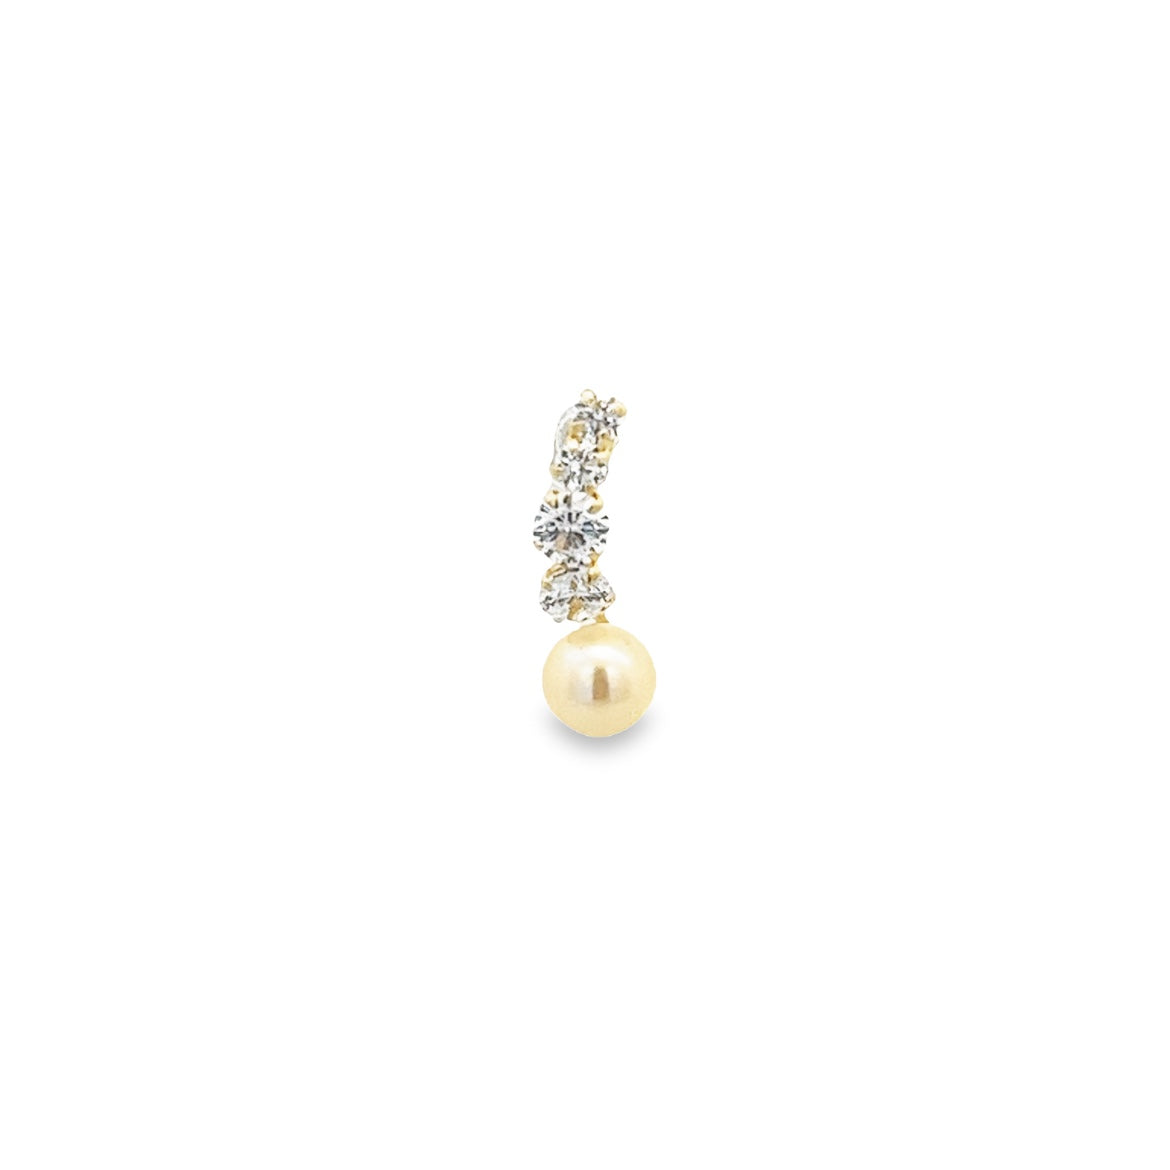 14K GOLD SINGLE PIERCING WITH PEARL AND CRYSTALS